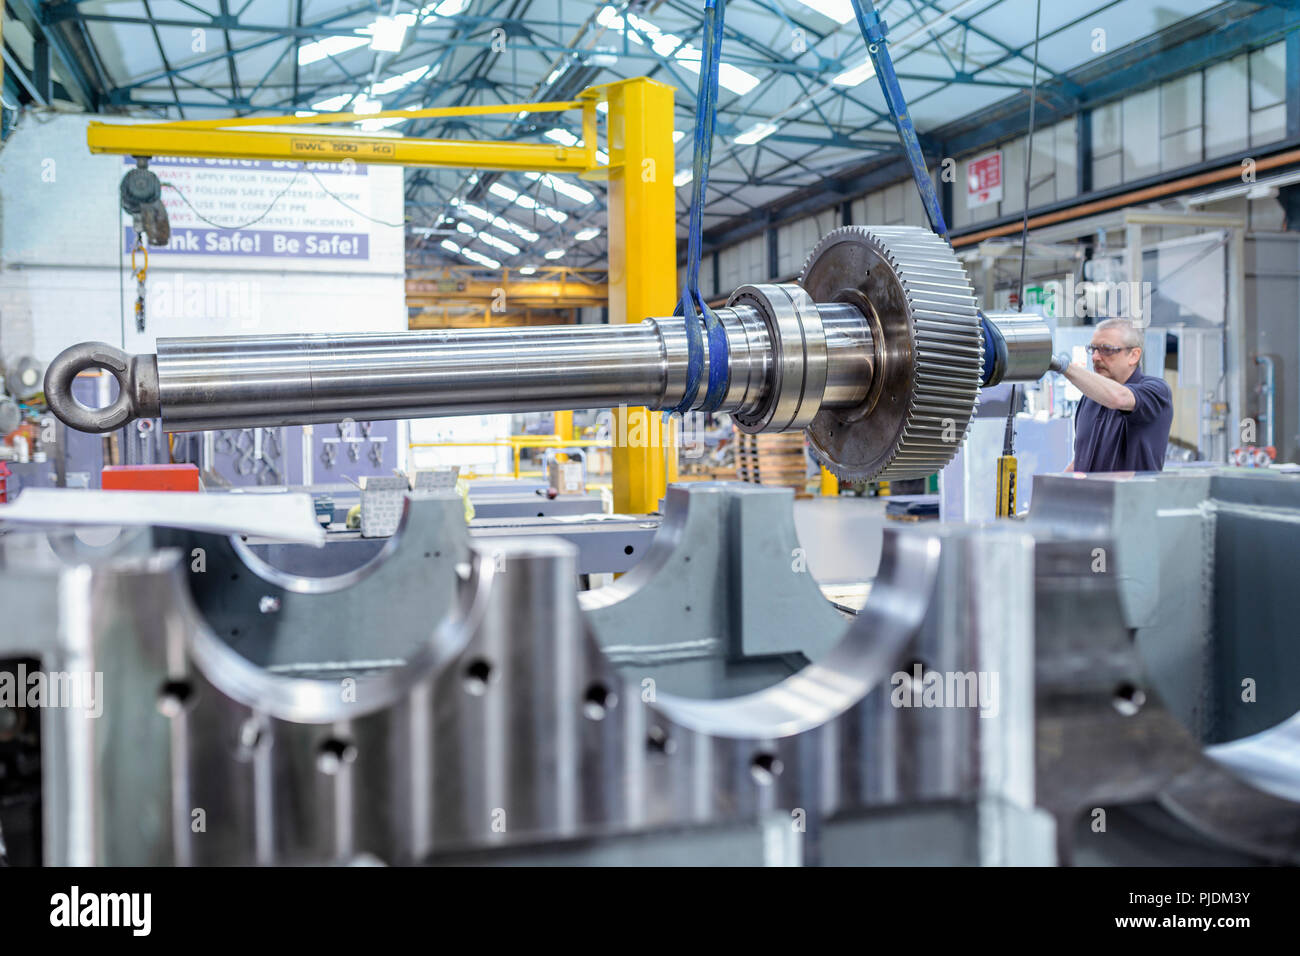 Engineer using crane to position large gear with spindle in gearbox factory Stock Photo